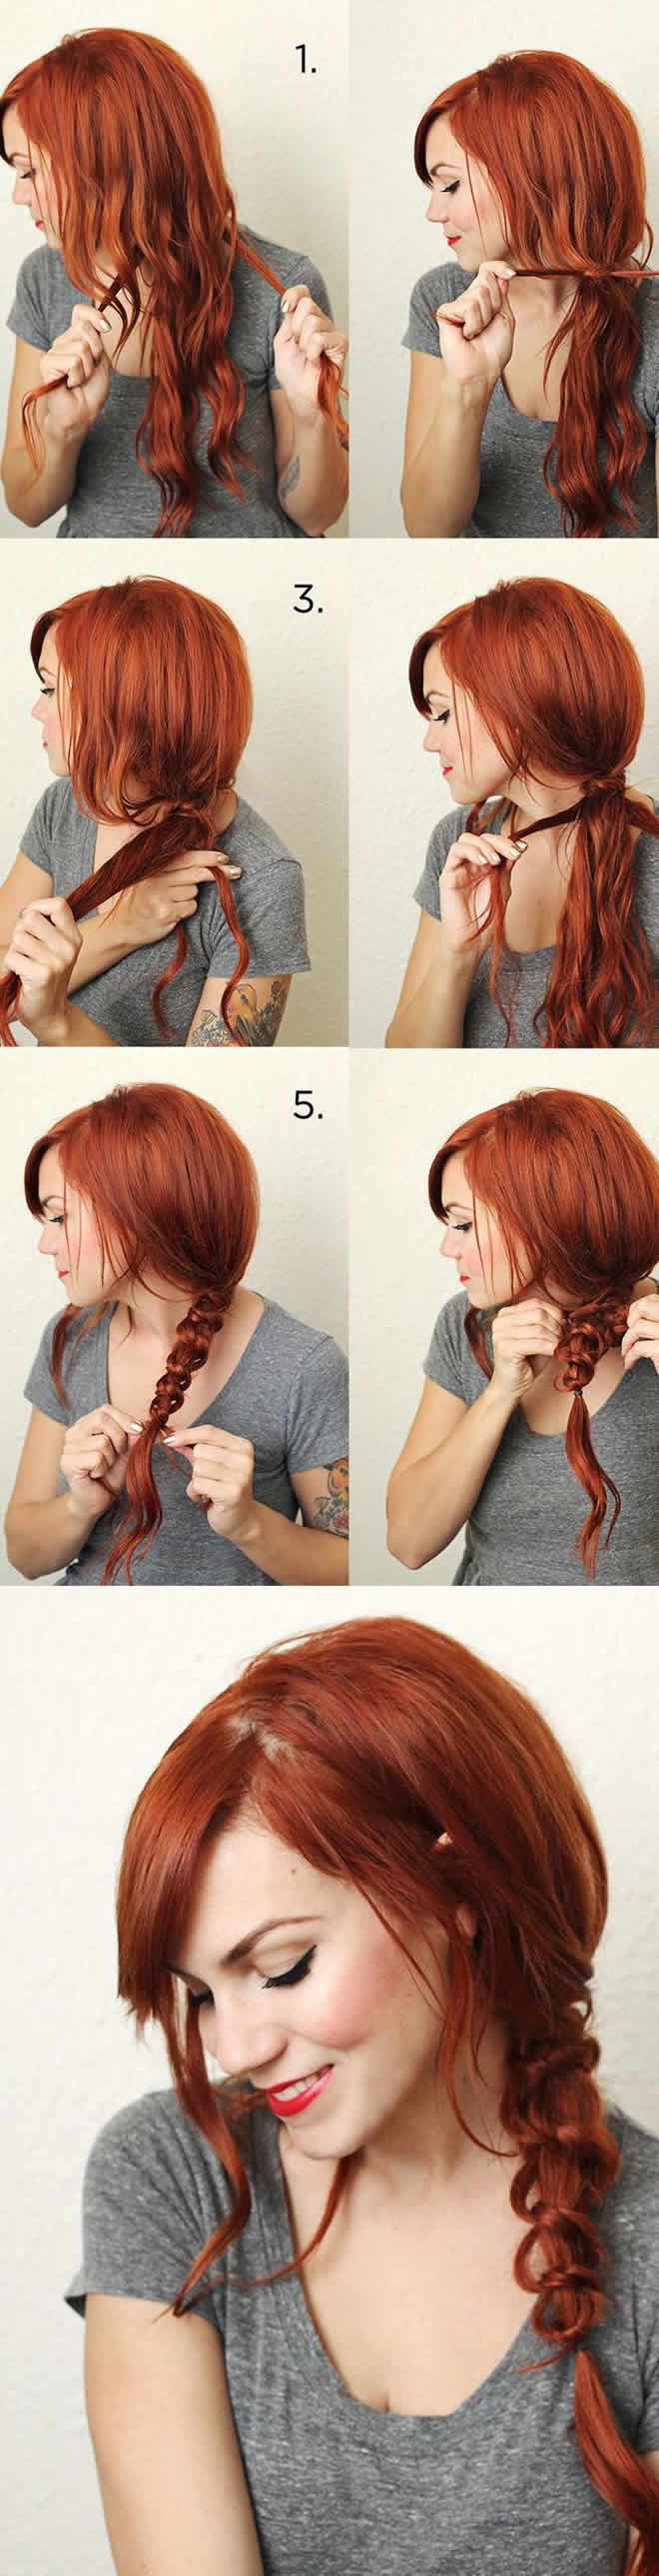 Simple Messy Knotted Braid